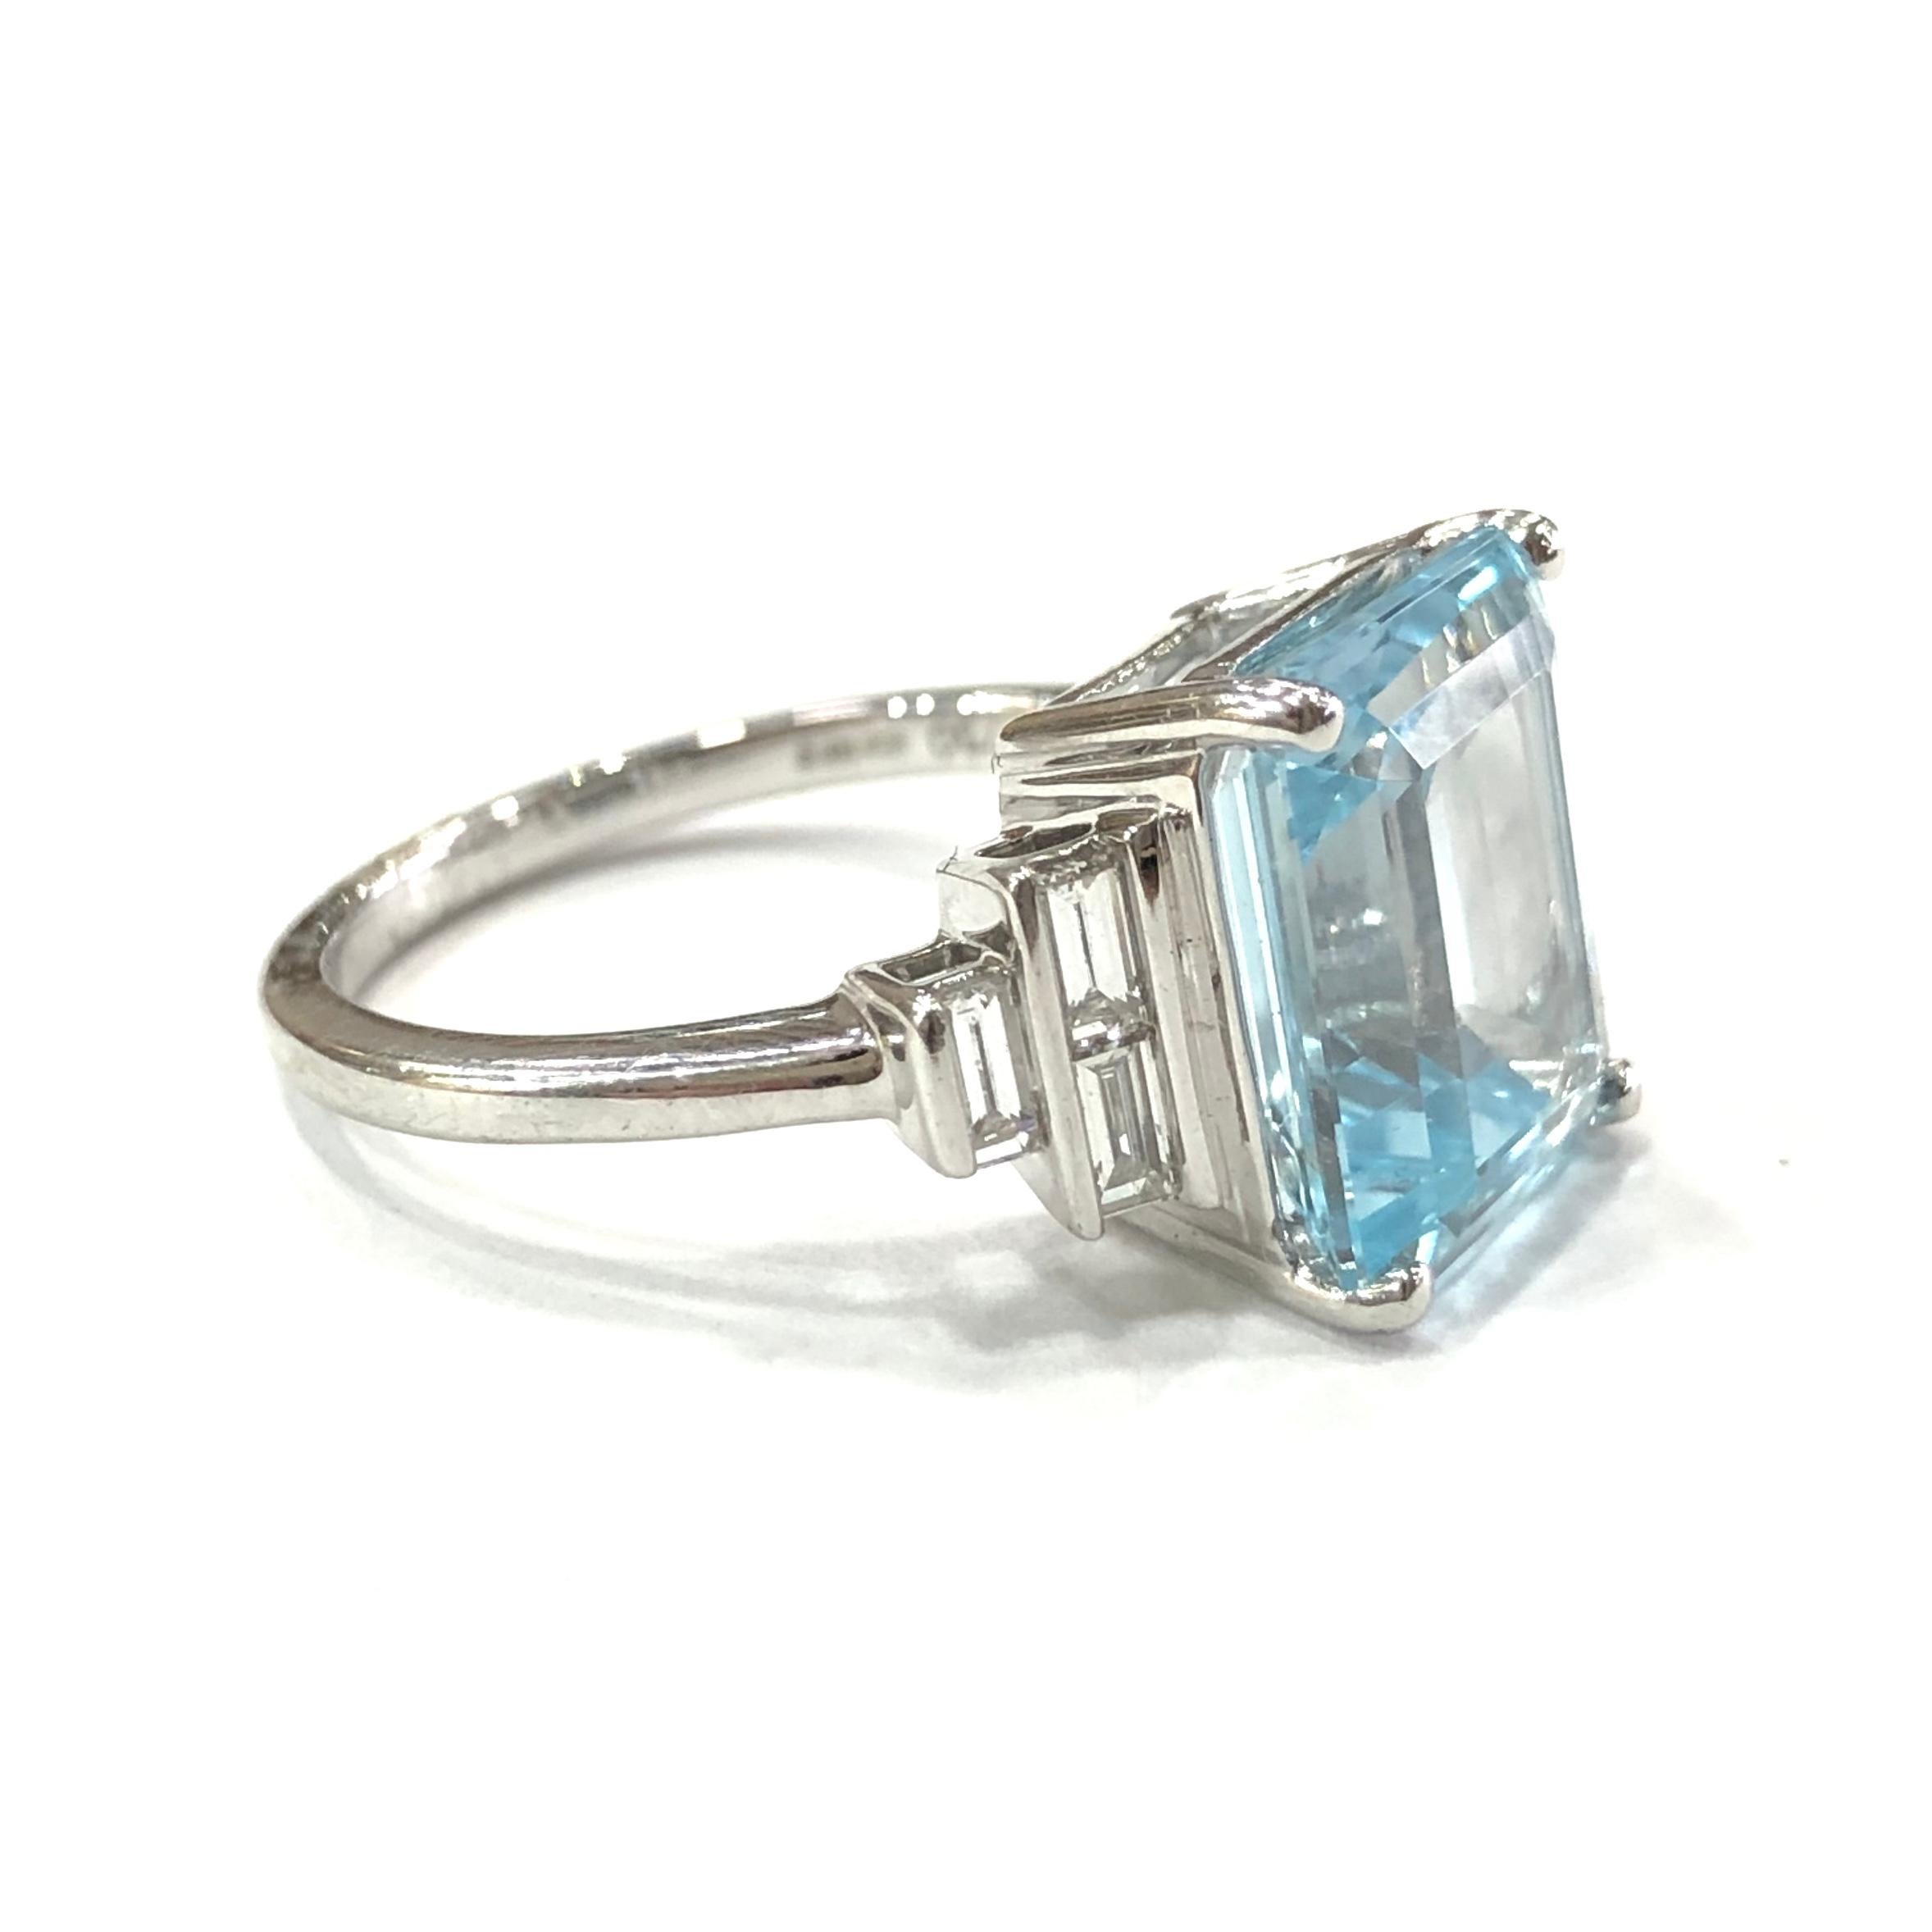 18ct White Gold Aquamarine and Diamond Ring. Set with a large 12x10mm central emerald cut Aquamarine set in a four claw setting. With six Baguette shape Diamonds set on the shoulders in a rubover setting. (three on each side)
With a full english